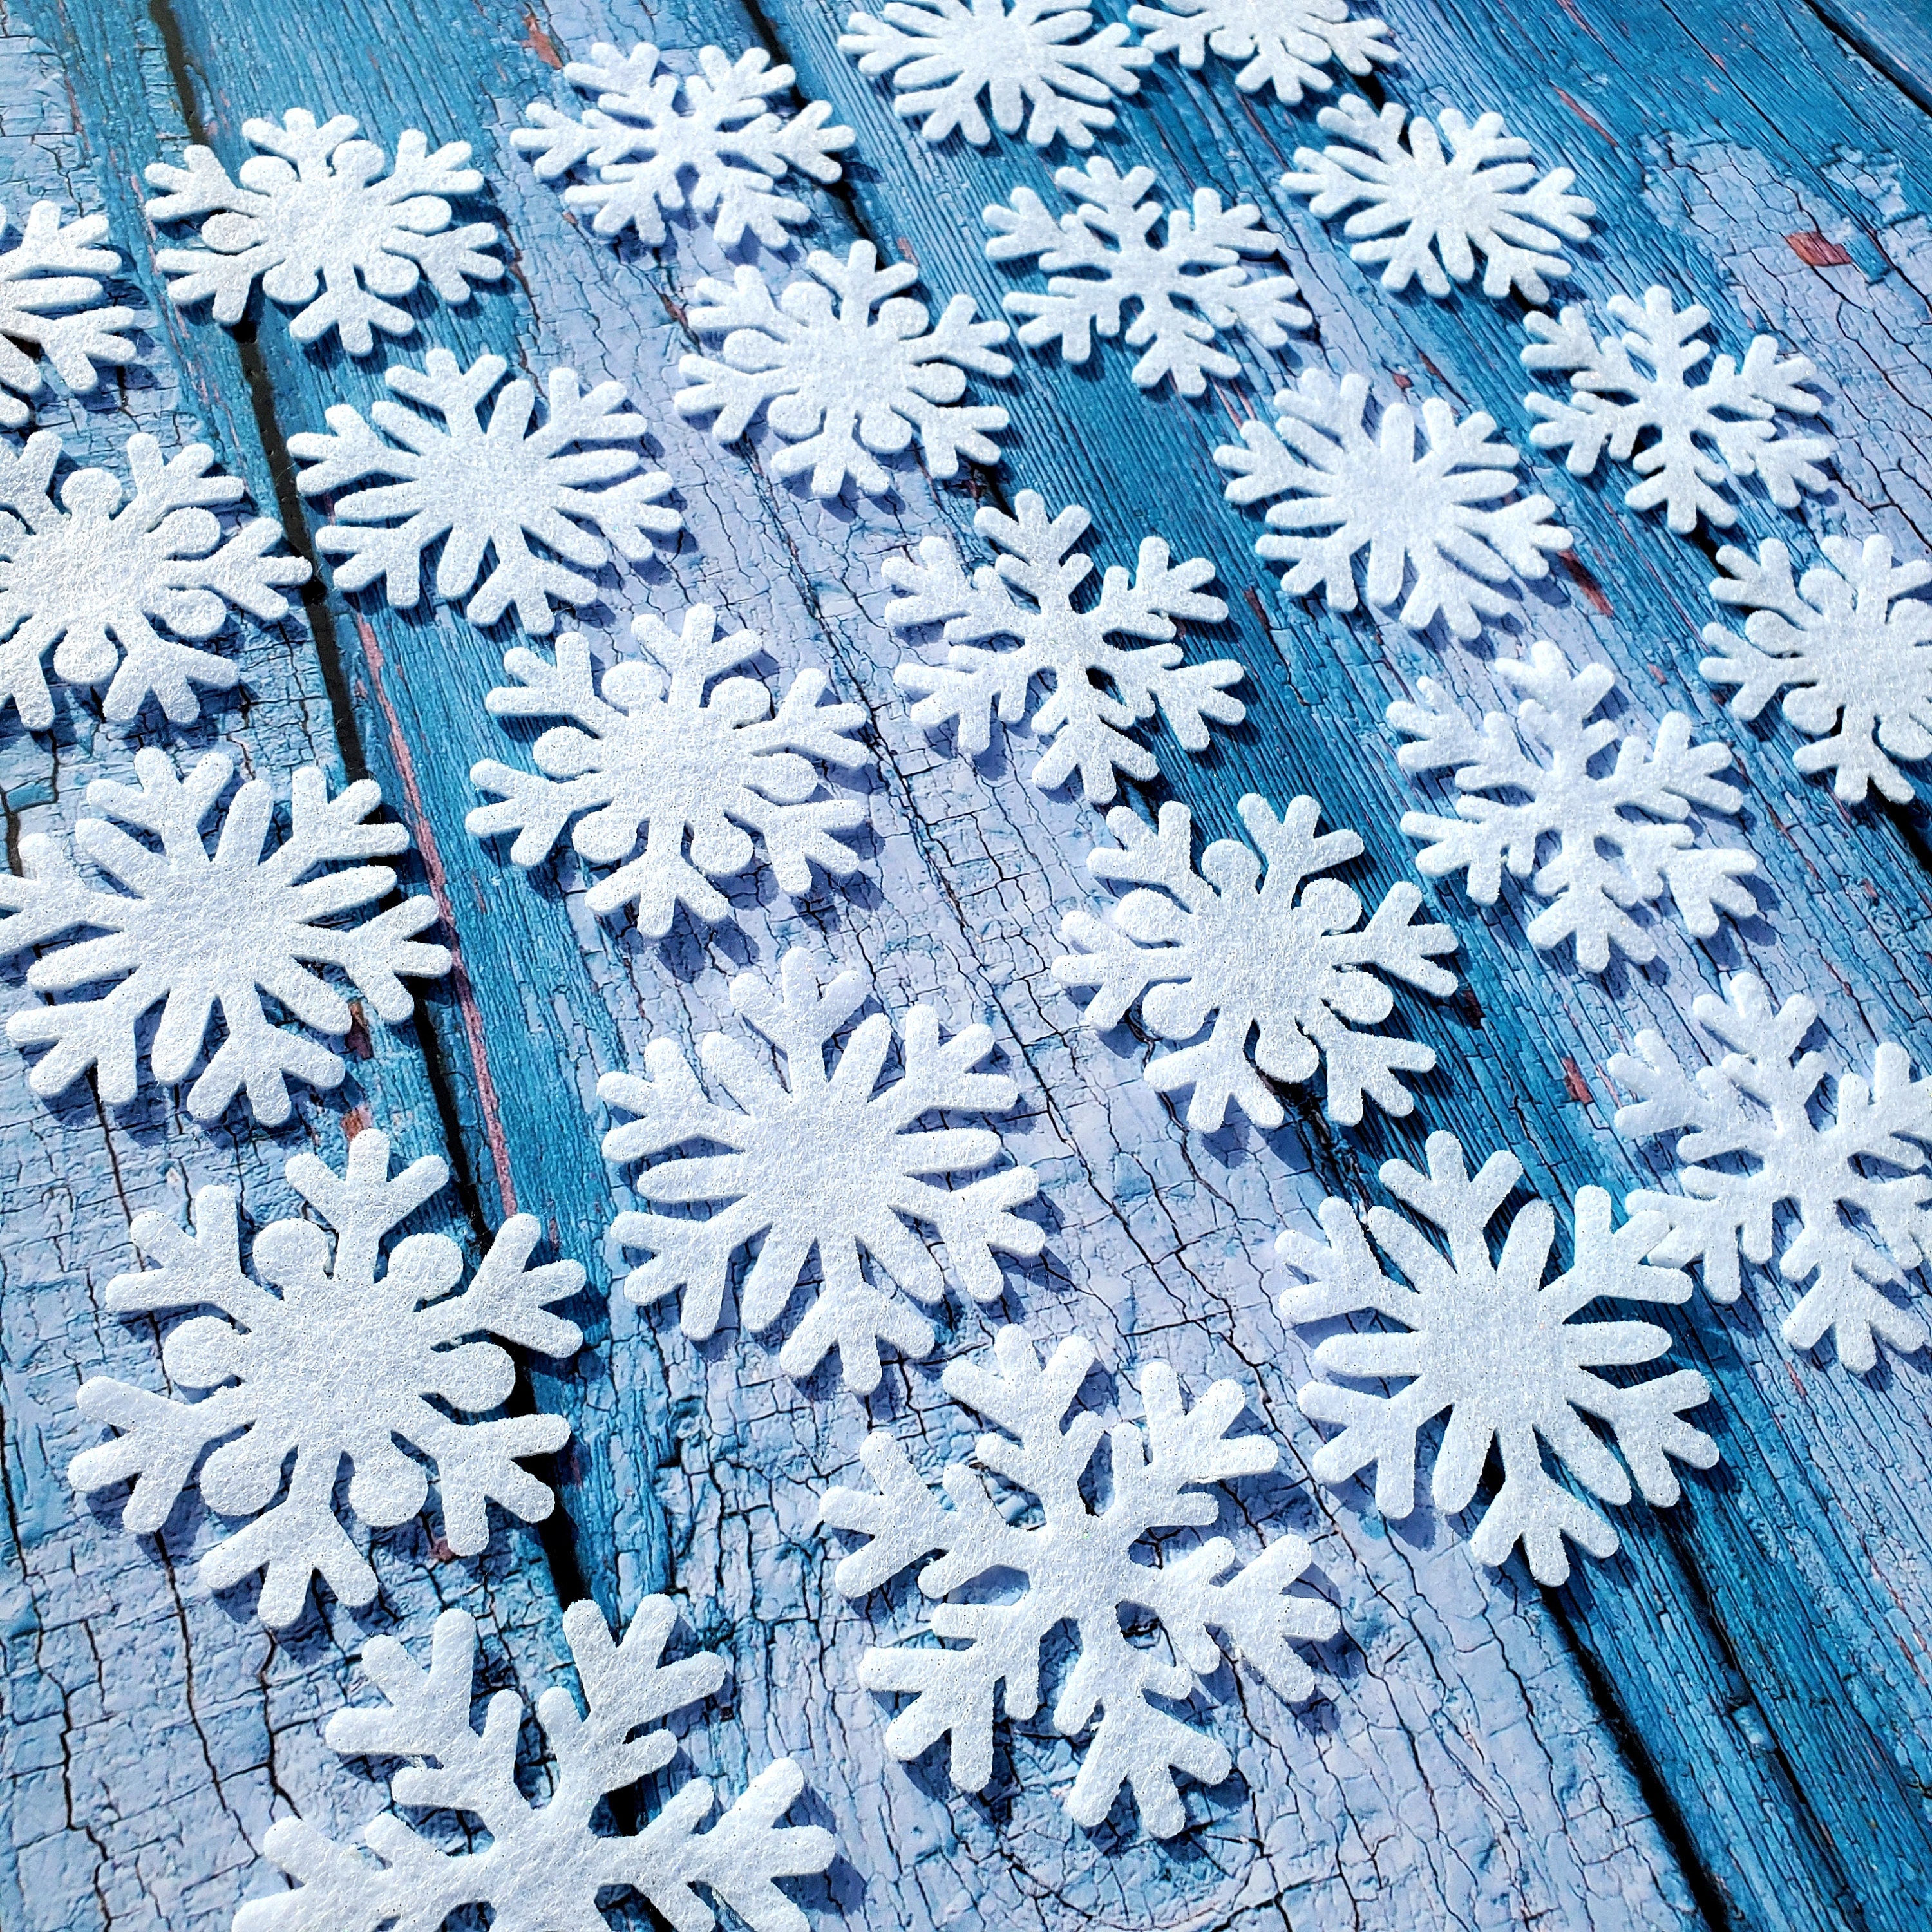 Set of Two Snowflake Felt Christmas Ornaments – Tilly & Puffin